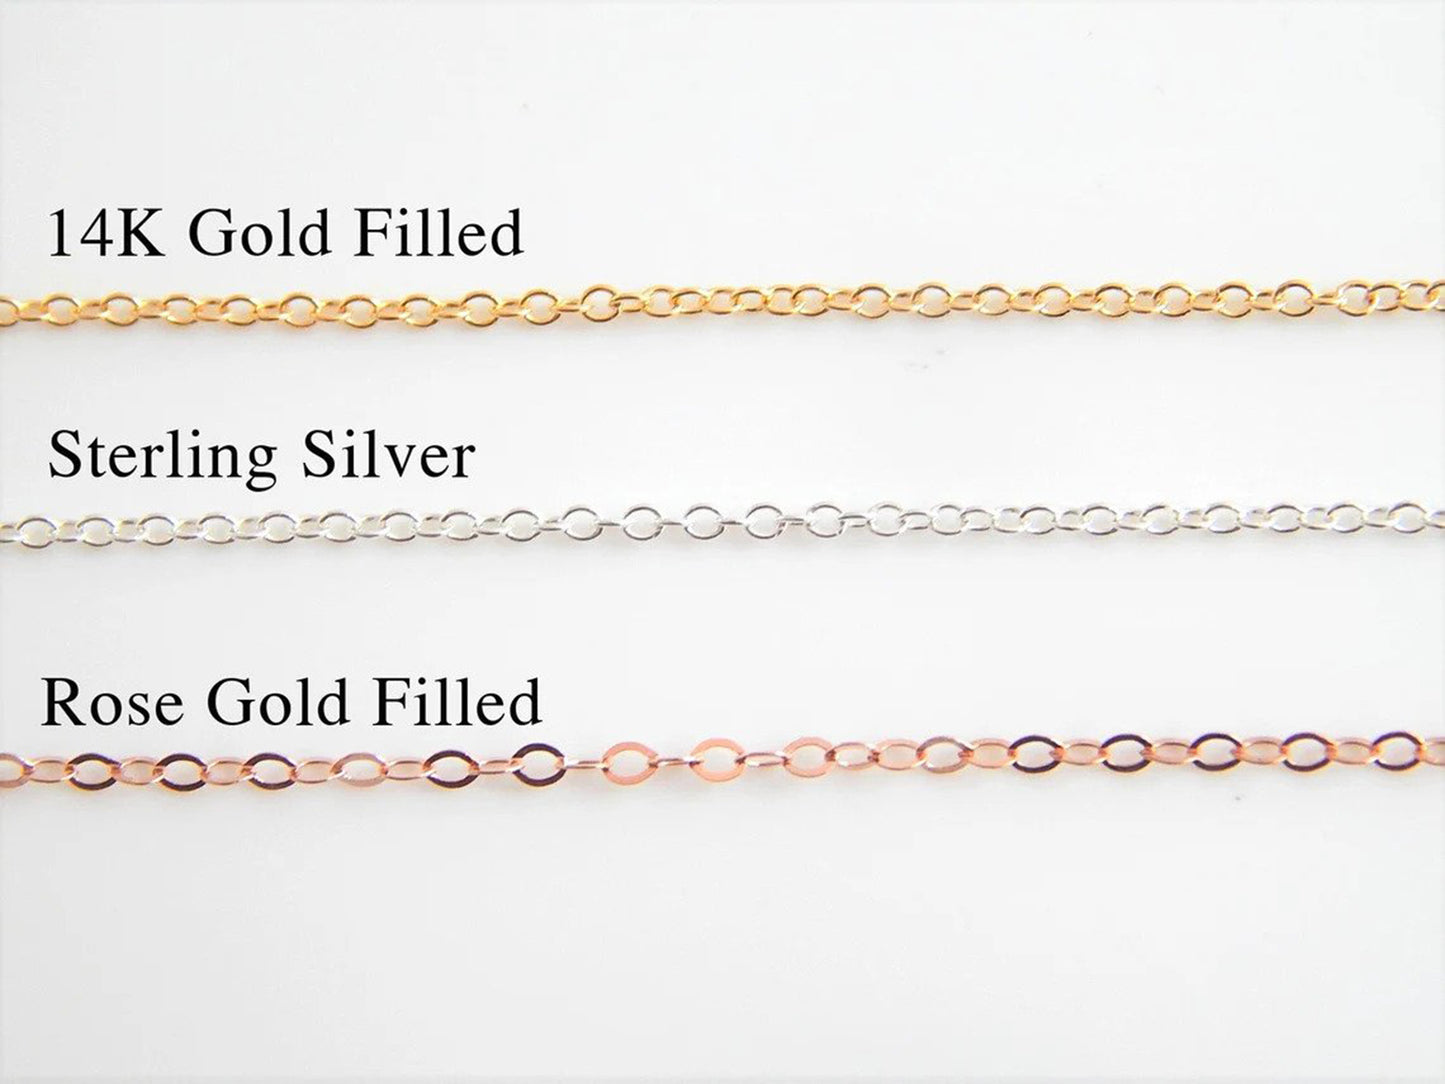 Three metal finishes offered by Gilded Sapphire's custom and handmade jewelry including 14 carat gold filled, sterling silver, and rose gold filled chain.